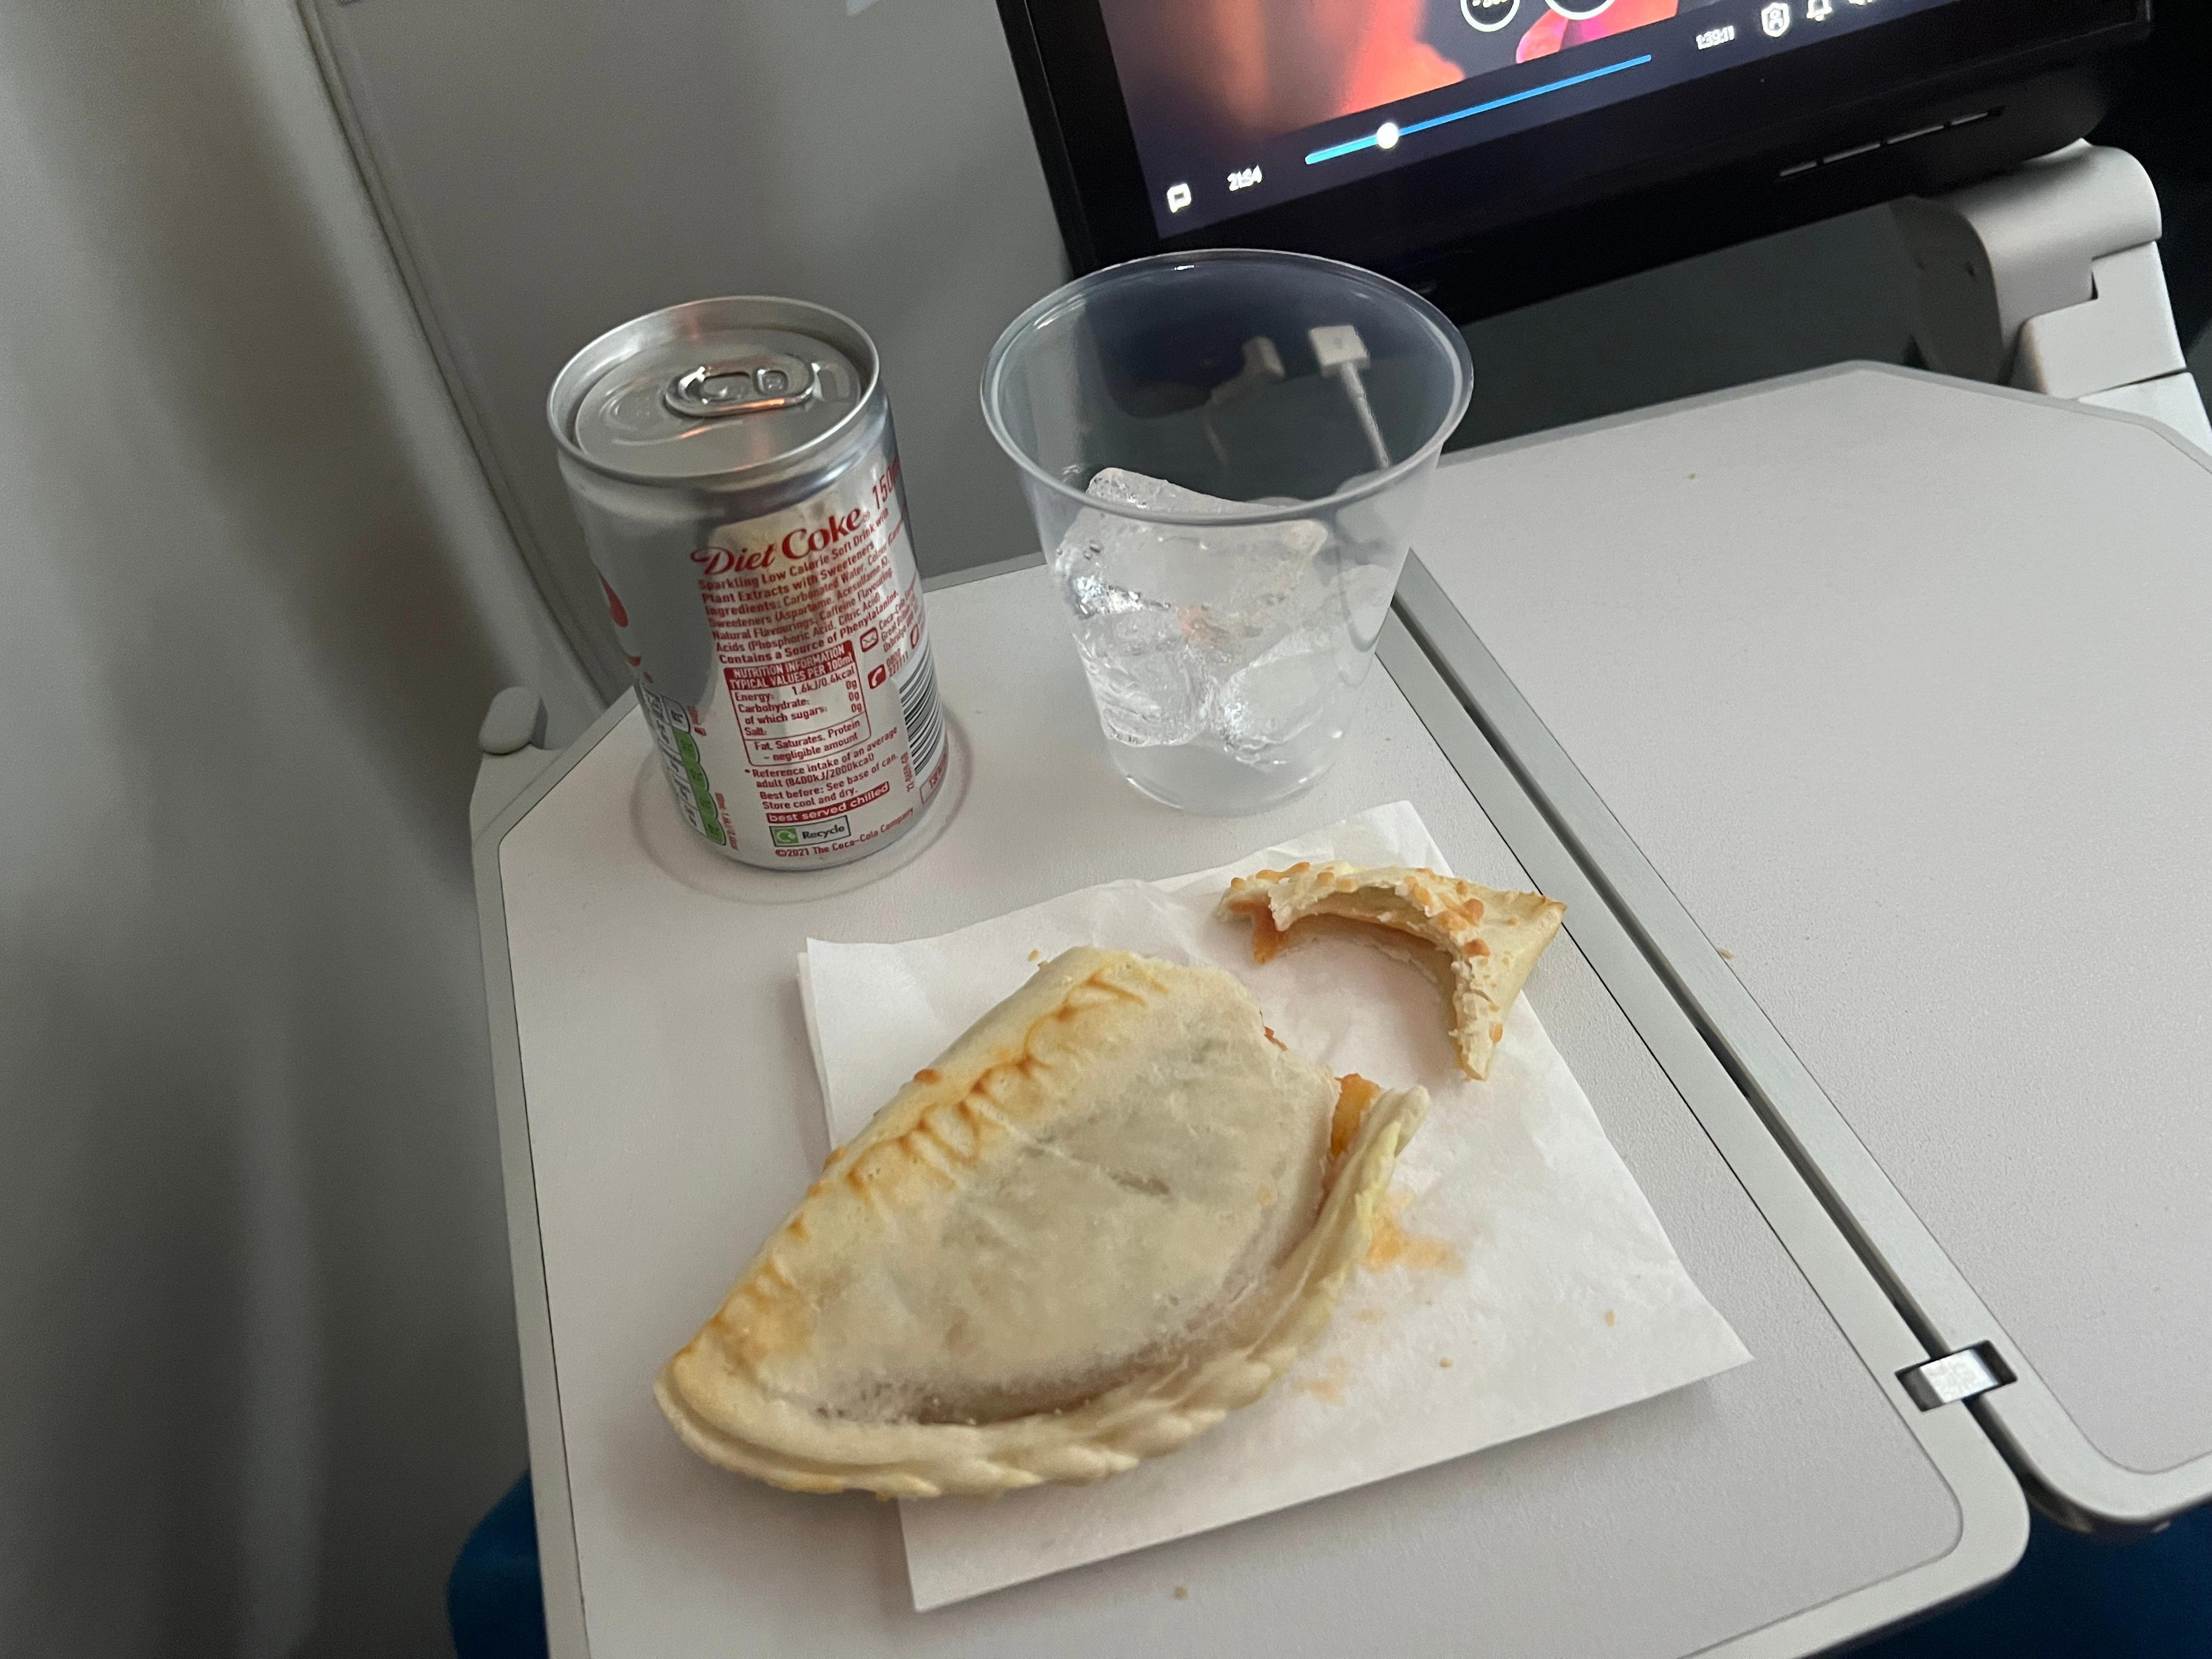 <p>The filling was basically mush, and it reminded me of baby food. The last time <a href="https://www.businessinsider.com/flew-air-canada-boeing-787-economy-wont-book-again-review-2022-7">I experienced this was on Air Canada</a>, but British Airways' pastry was better, though still not great.</p><p>I'd prefer a savory pastry filled with actual carrot cubes, plump peas, and ground meat.</p>